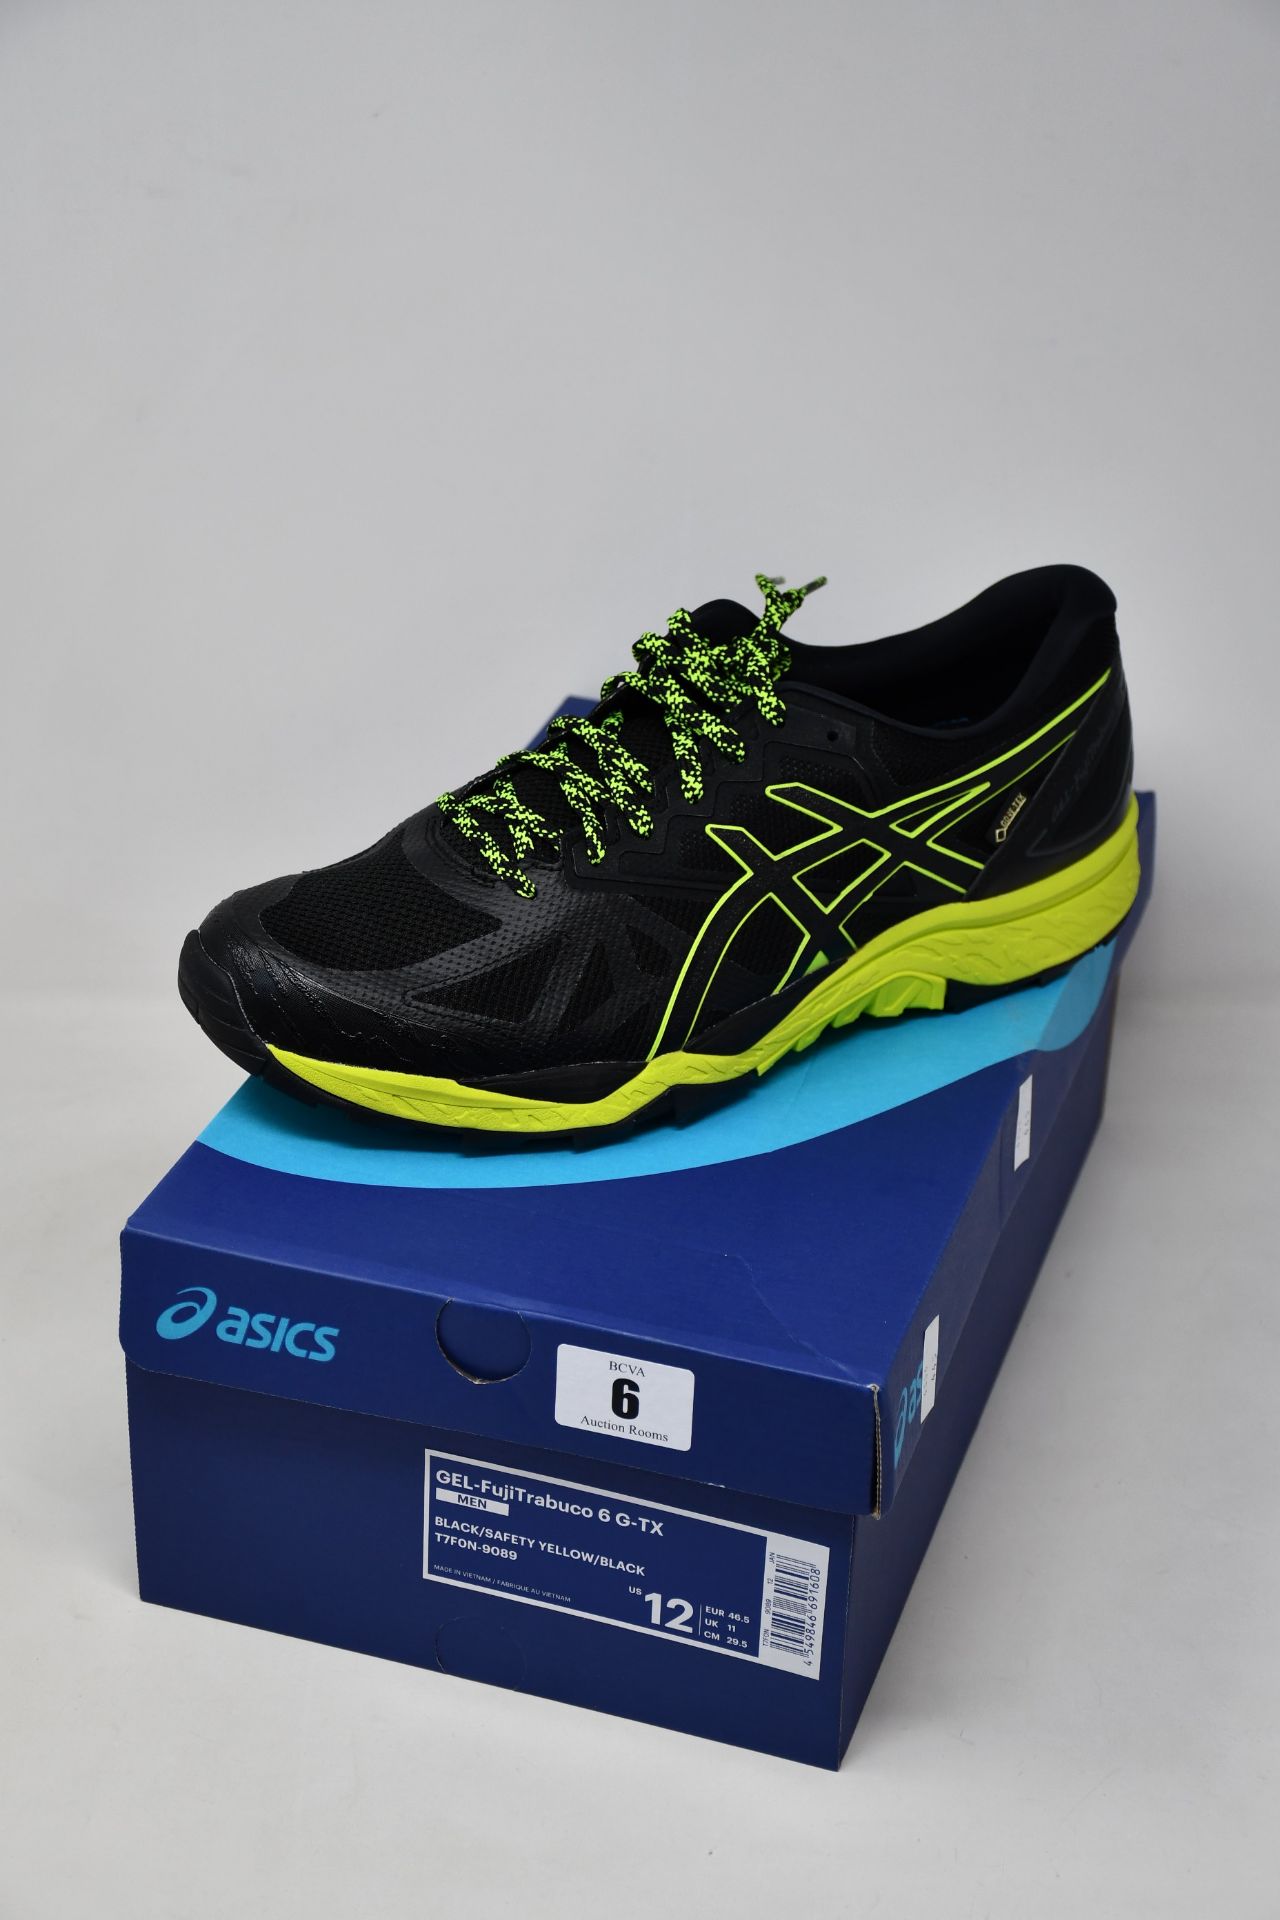 A pair of as new Asics Gel-FujiTrabuco 6 G-TX trainers (UK 11).